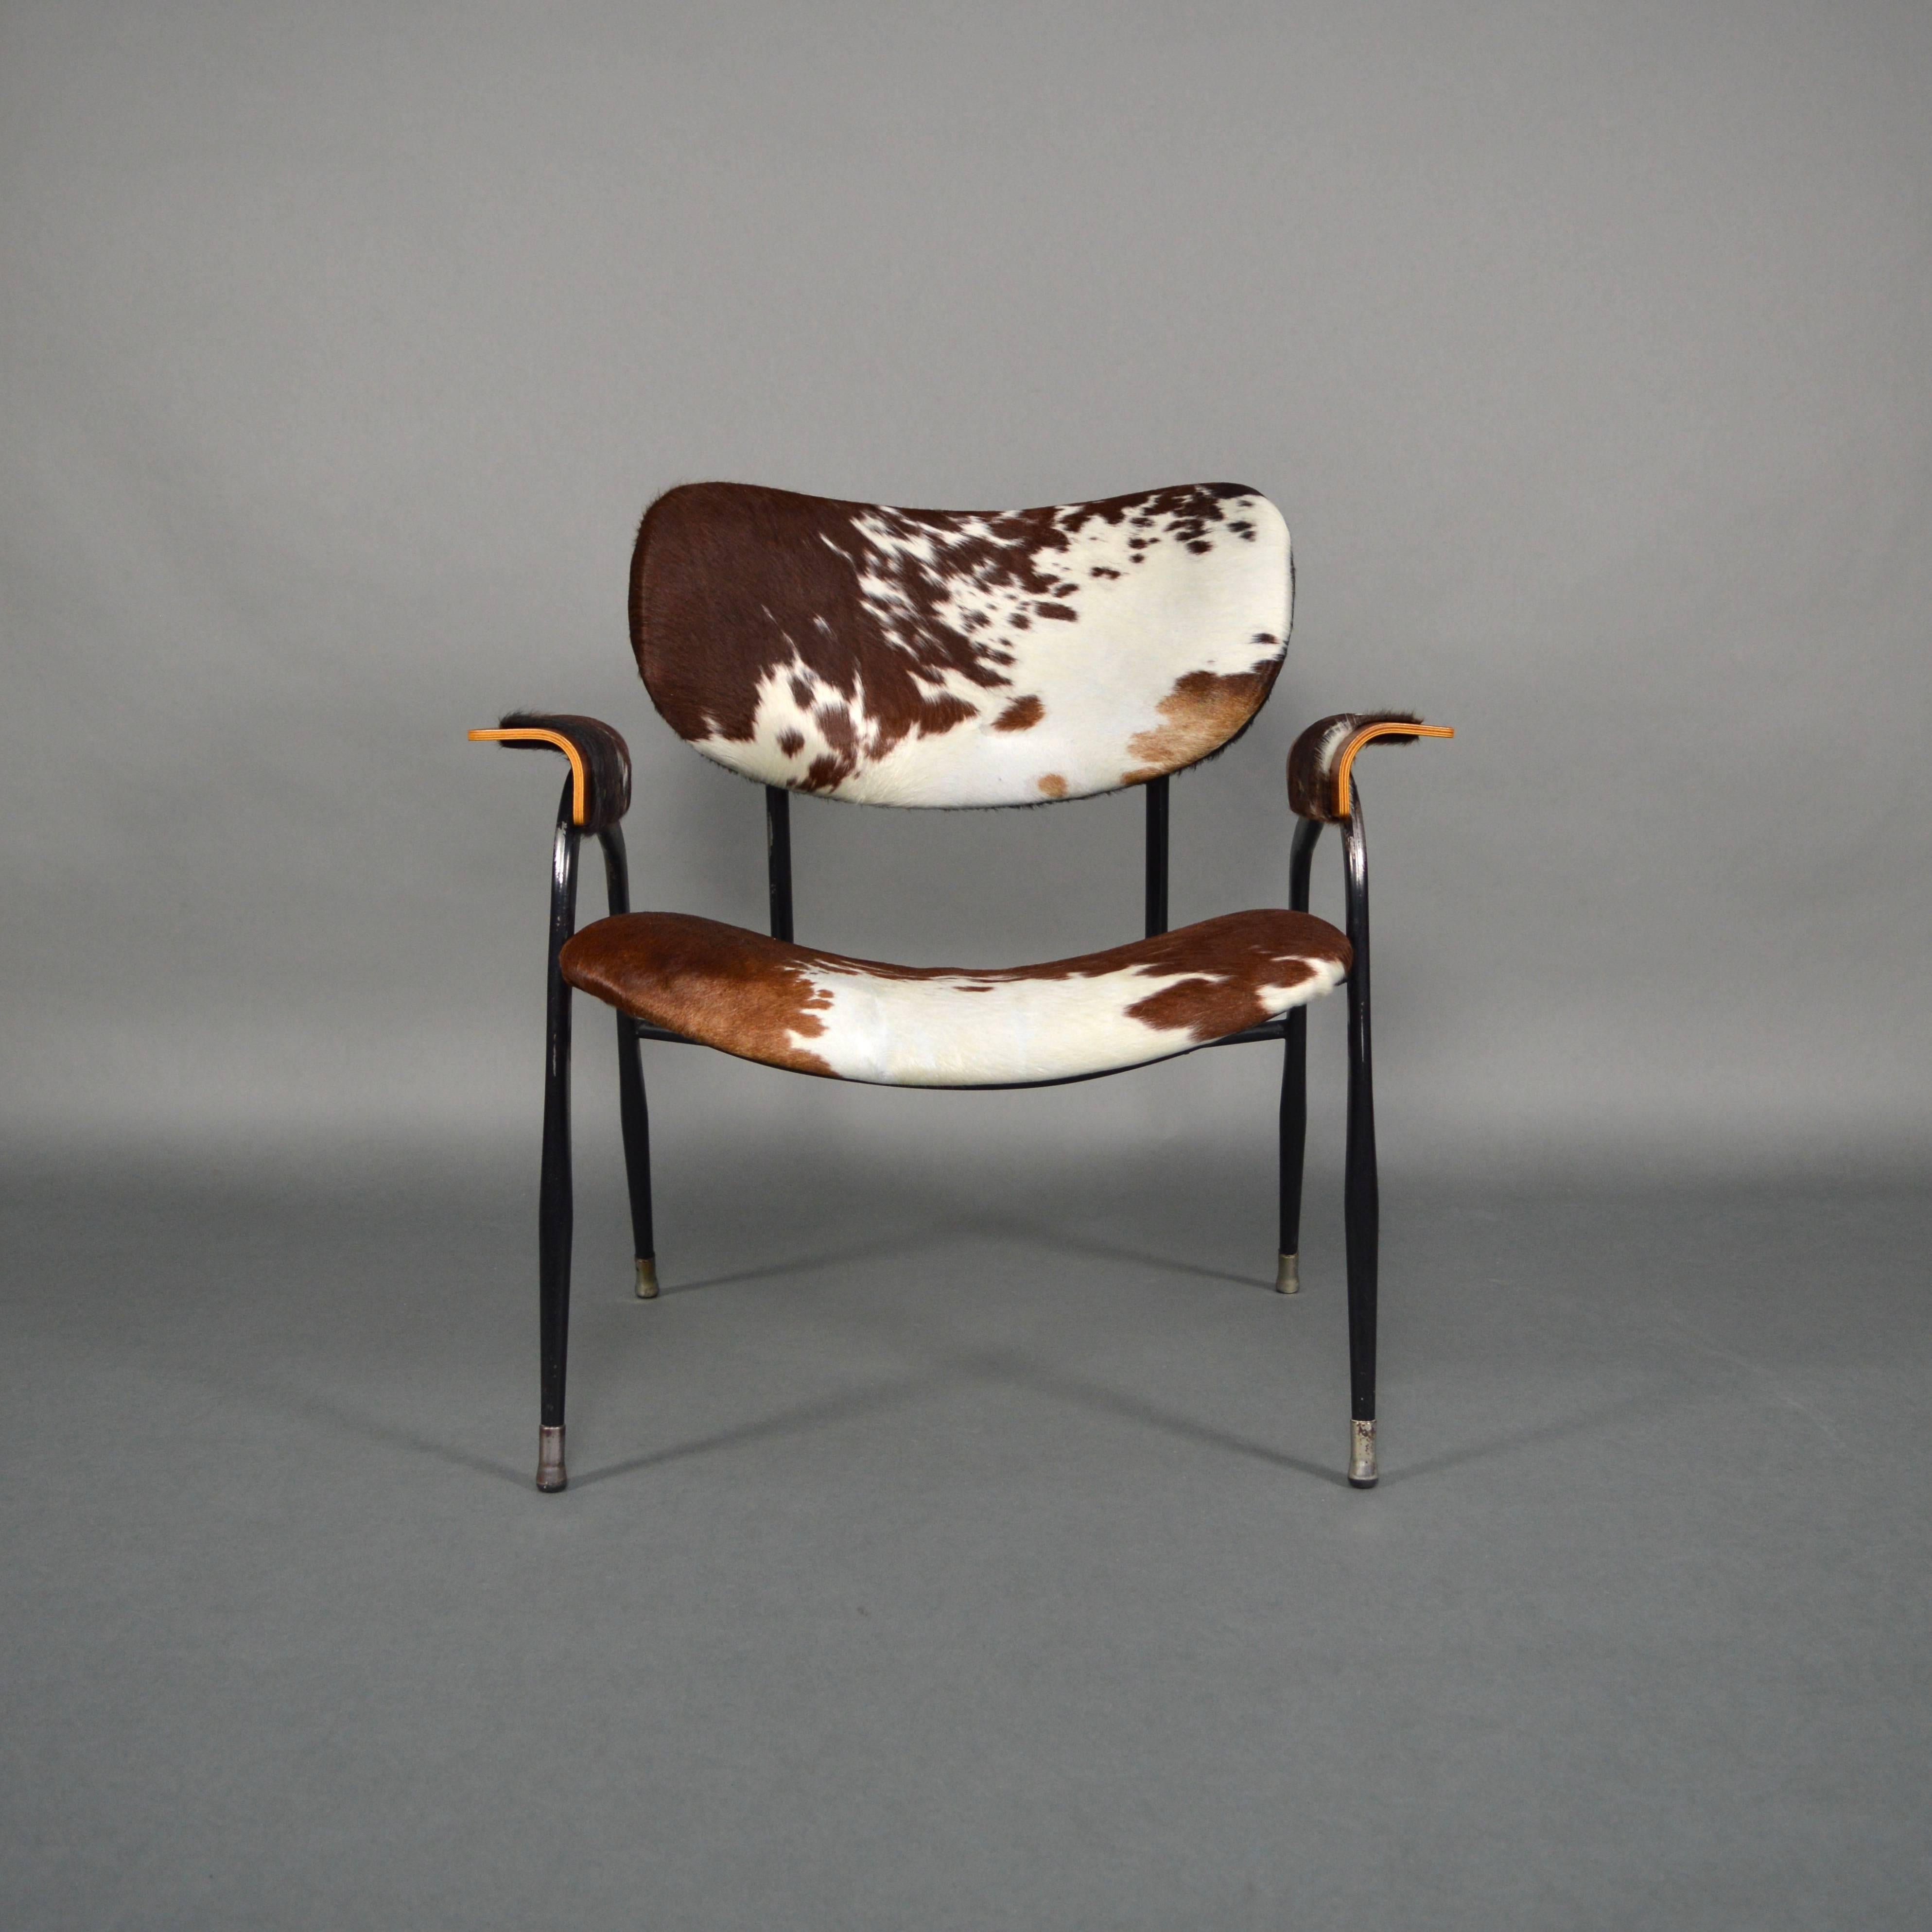 Italian Gastone Rinaldi for RIMA Lounge Chair with New Cowhide, Italy, 1950s